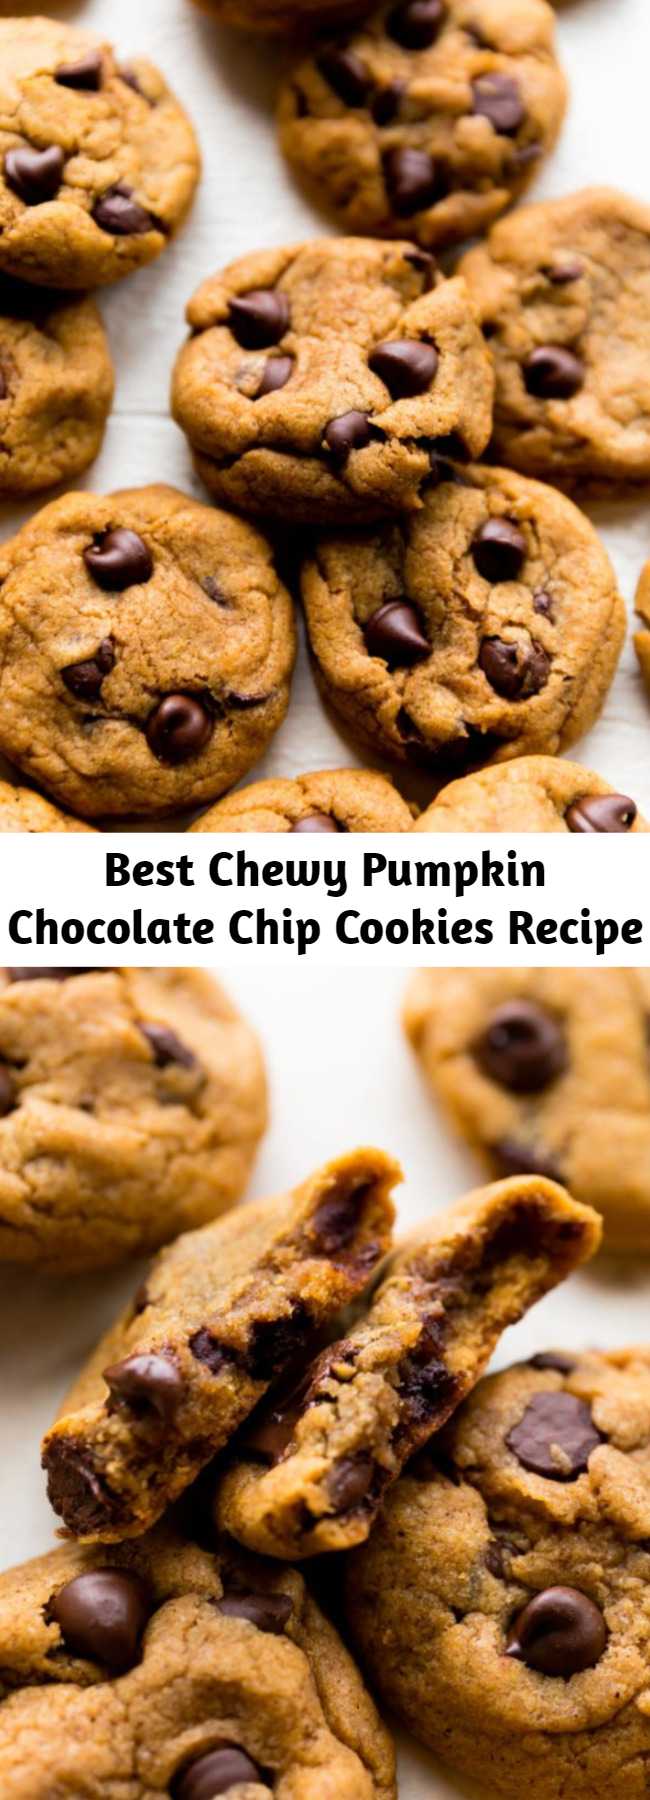 Best Chewy Pumpkin Chocolate Chip Cookies Recipe - I’m confident you’ll love these pumpkin chocolate chip cookies! Omitting the egg, using melted butter, and blotting the pumpkin guarantee a chewier texture.